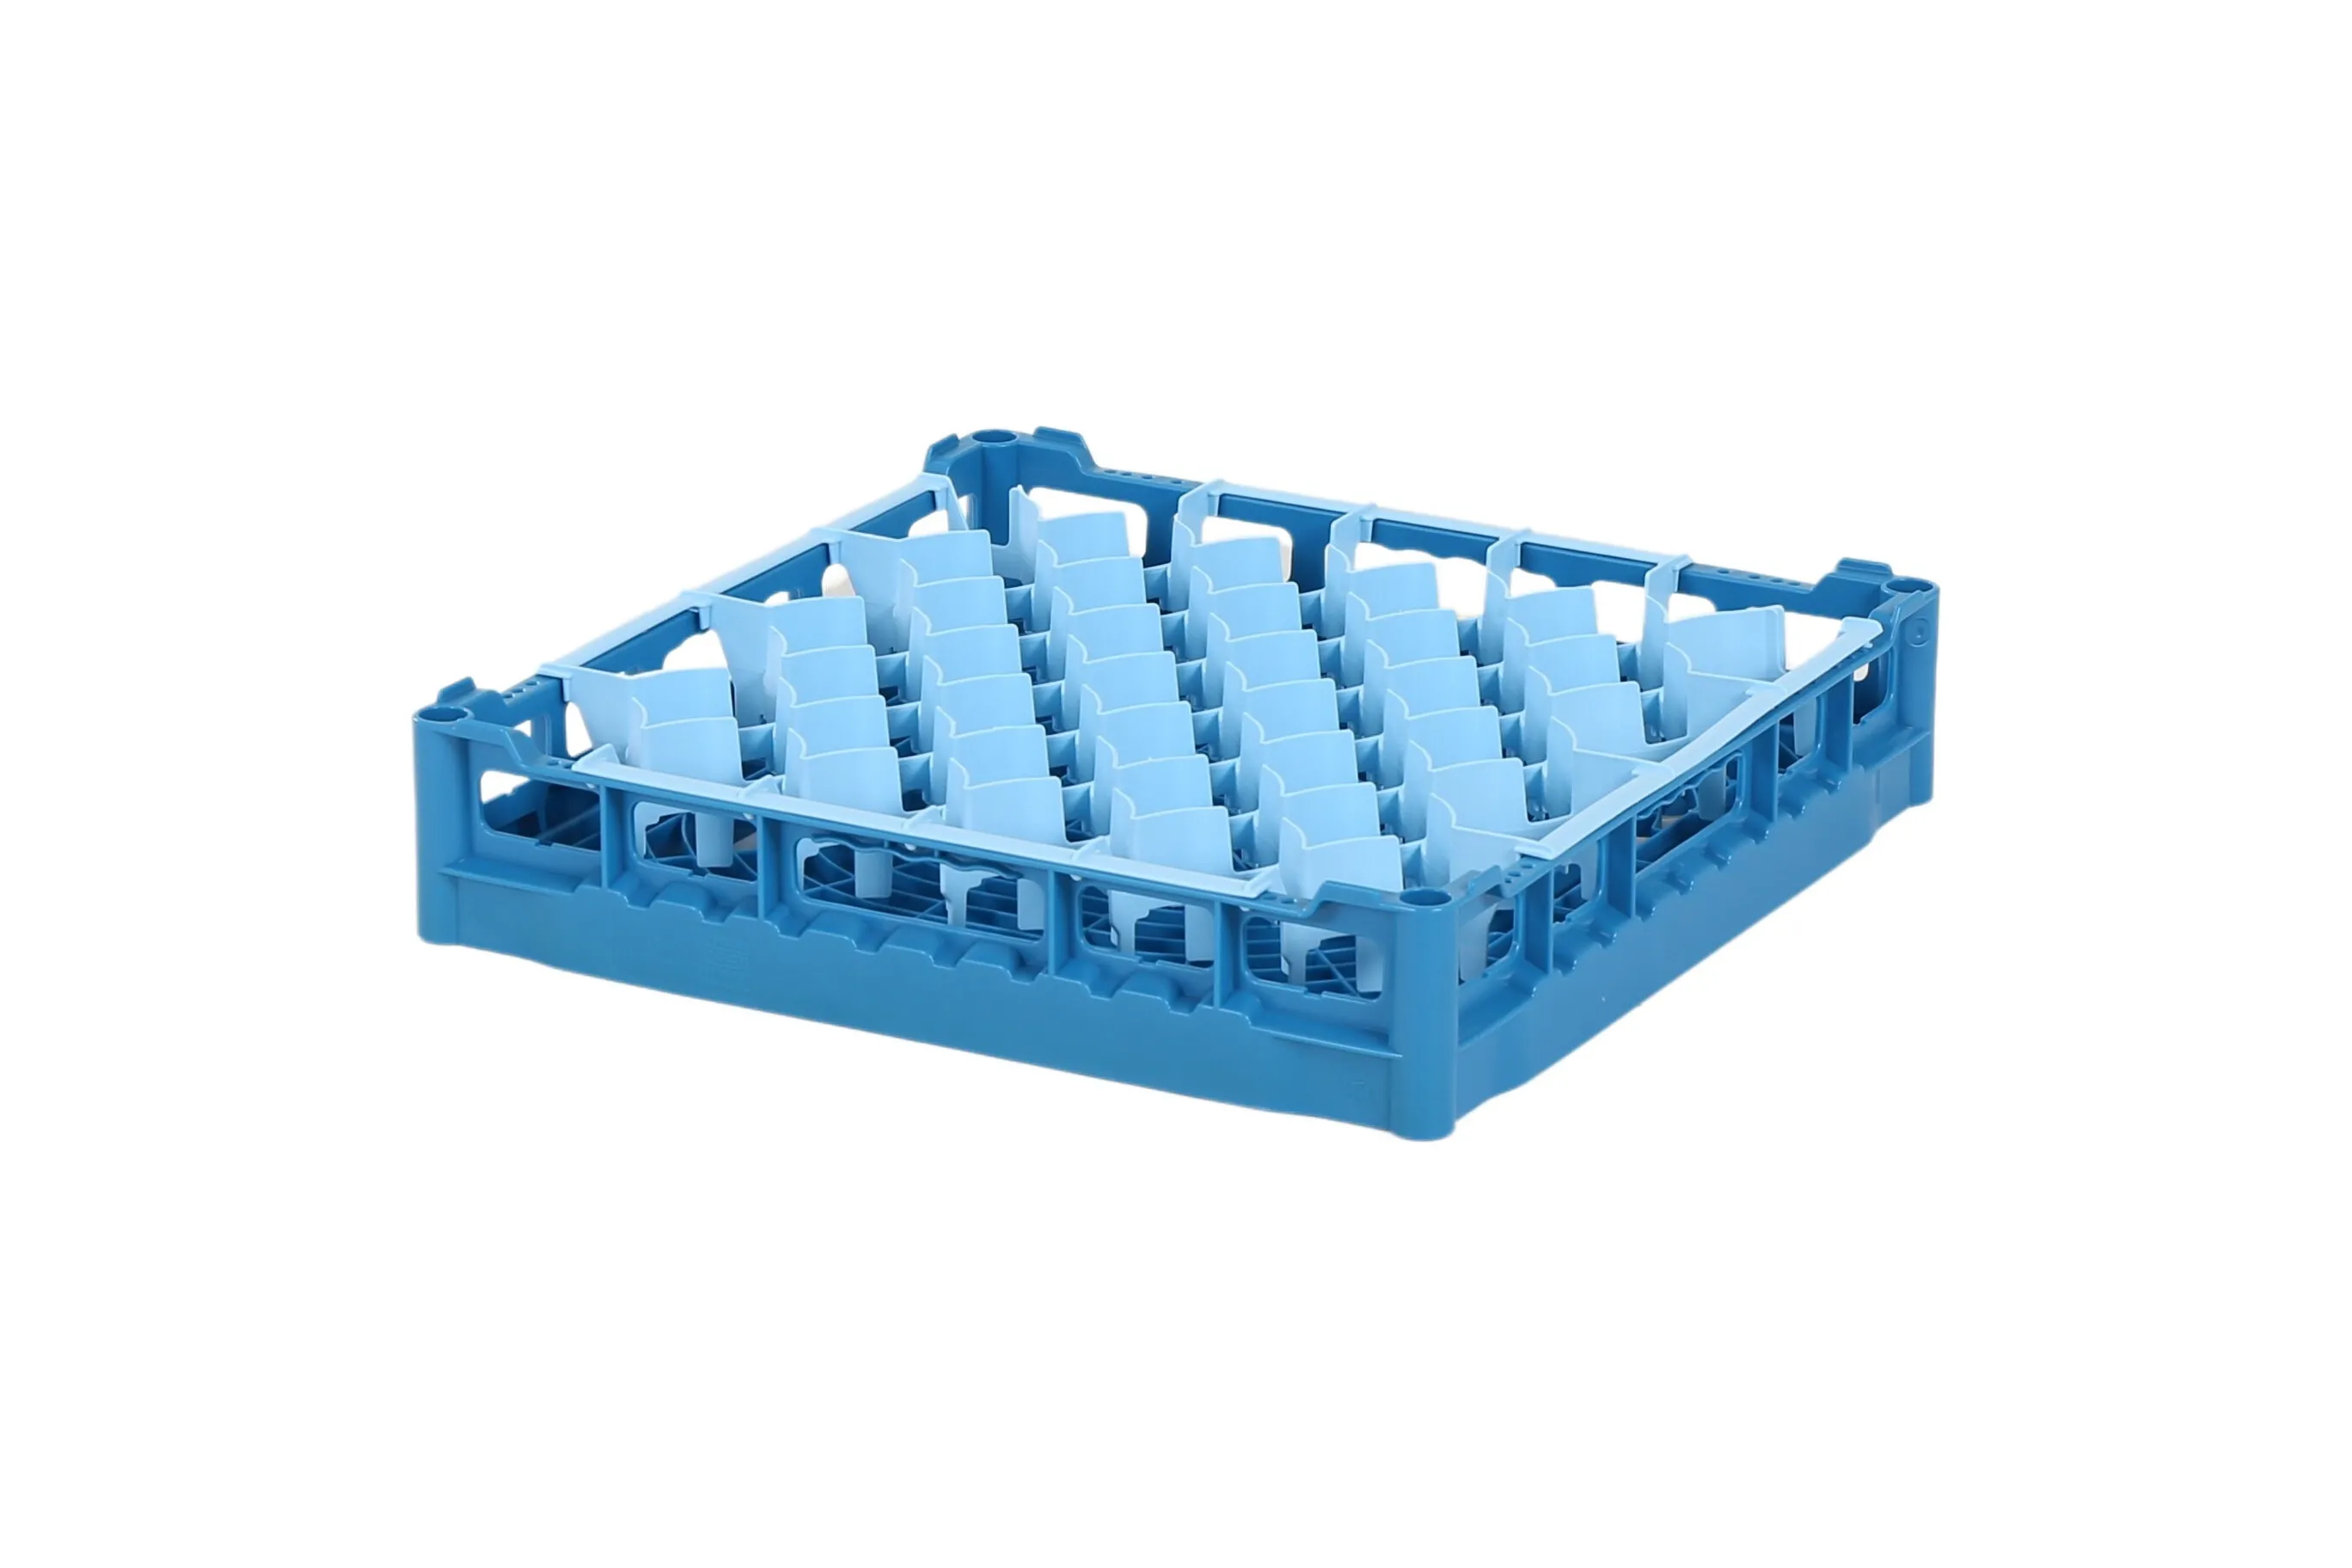 Glass basket 500x500mm blue - maximum glass height 73 mm - with blue 44-compartment partition - maximum glass diameter 67mm